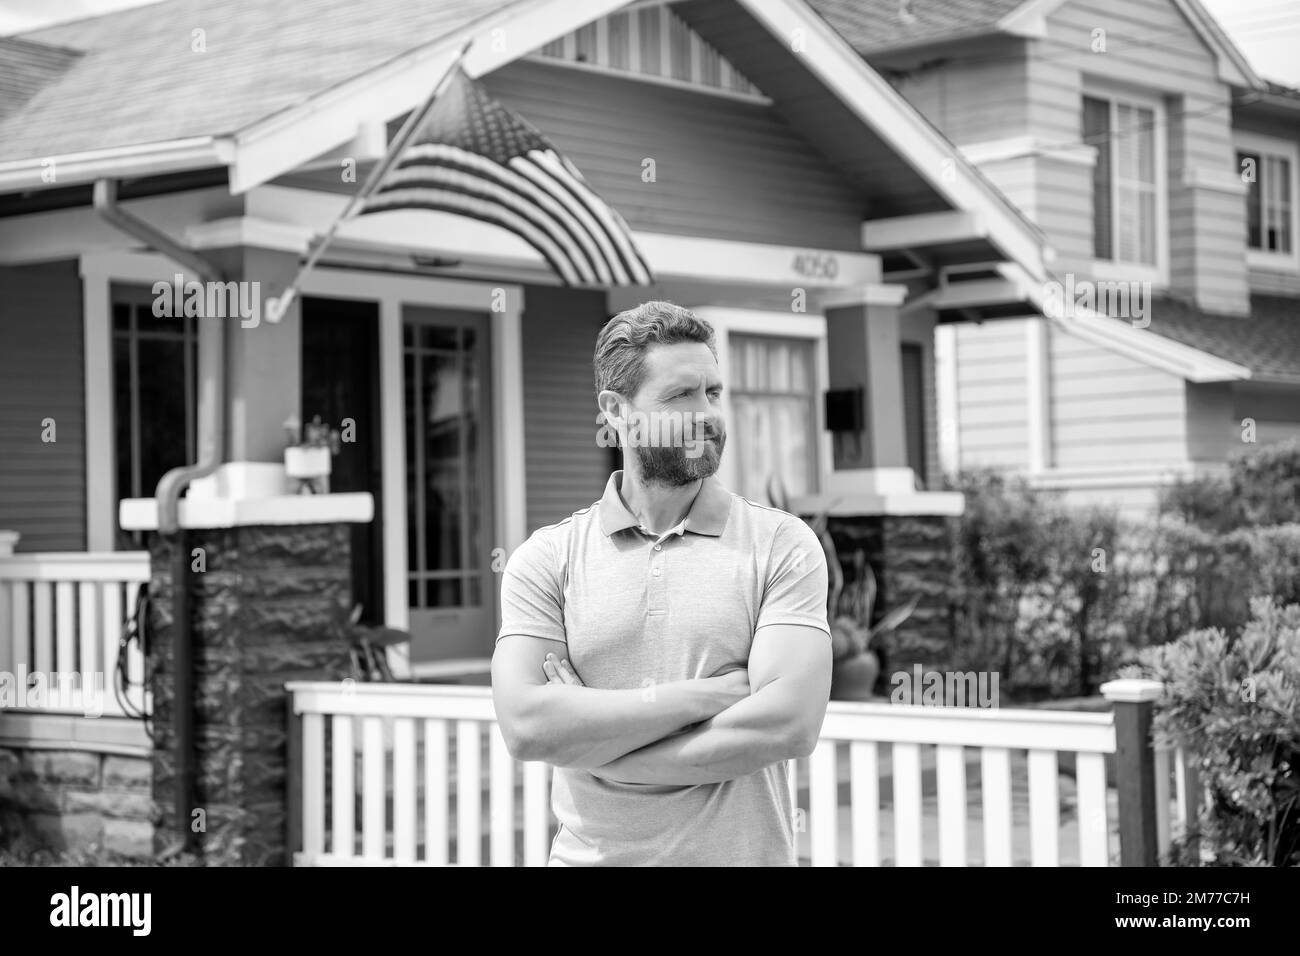 bearded man broker selling or renting house with american flag, home Stock Photo